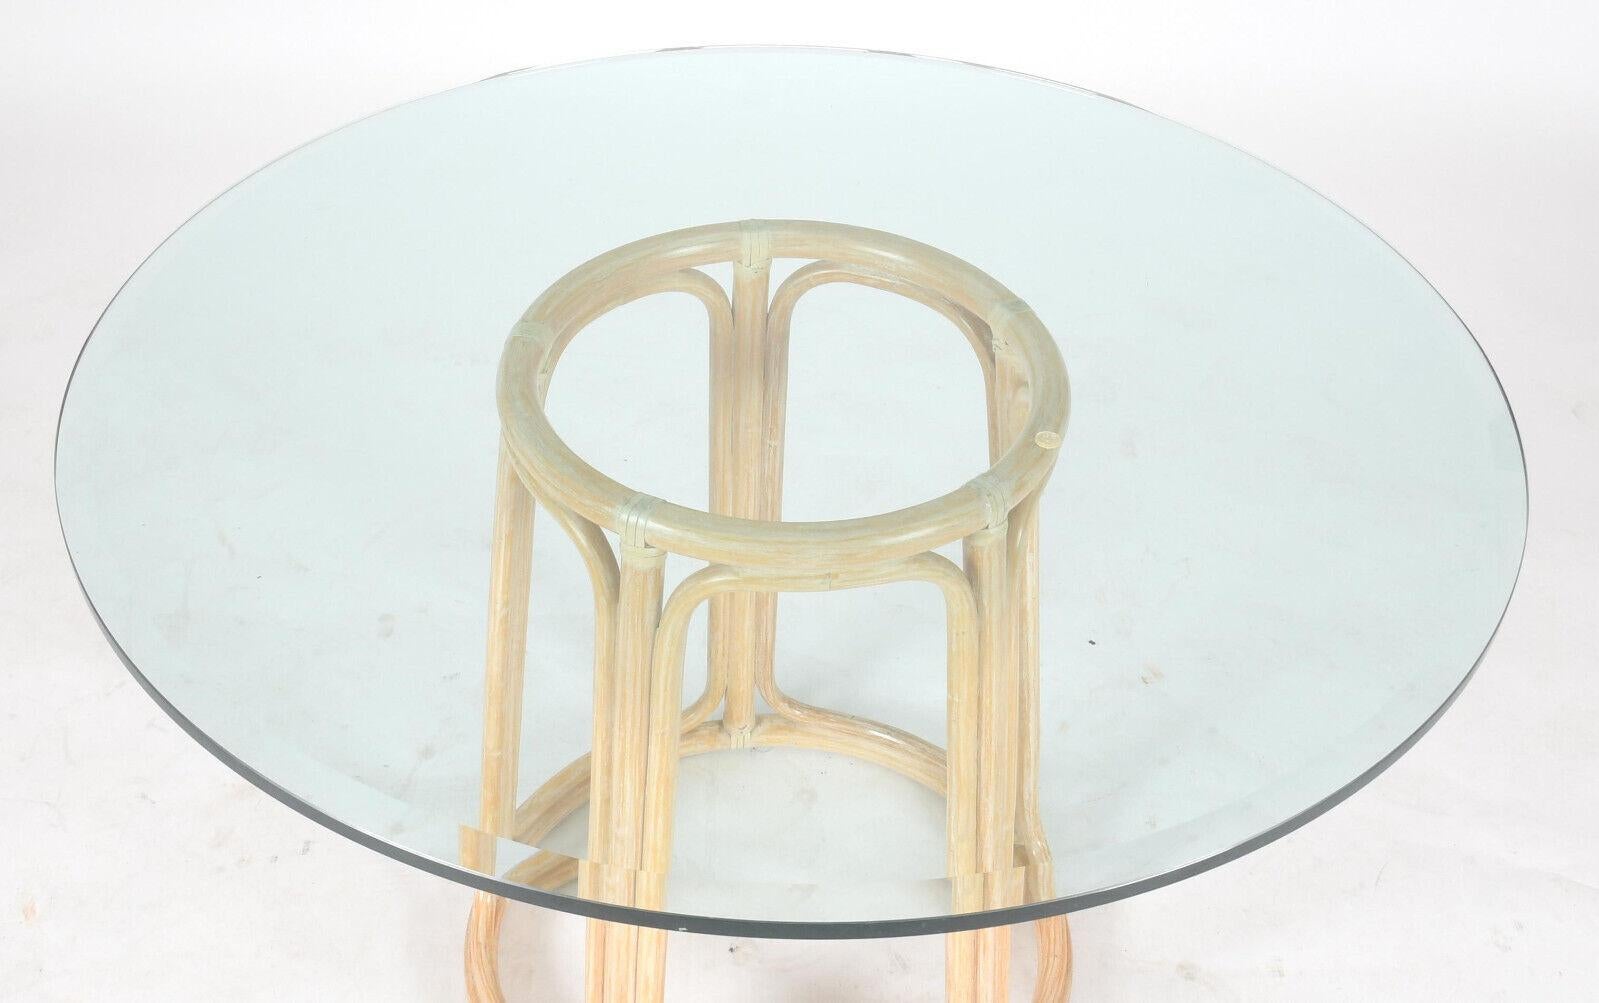 Designed for a glass top, this rattan pedestal dining table base is marked McGuire San Francisco and has the original cerused washed finish. The organic modern base is constructed of bent rattan and features McGuire's signature rawhide lacing. A